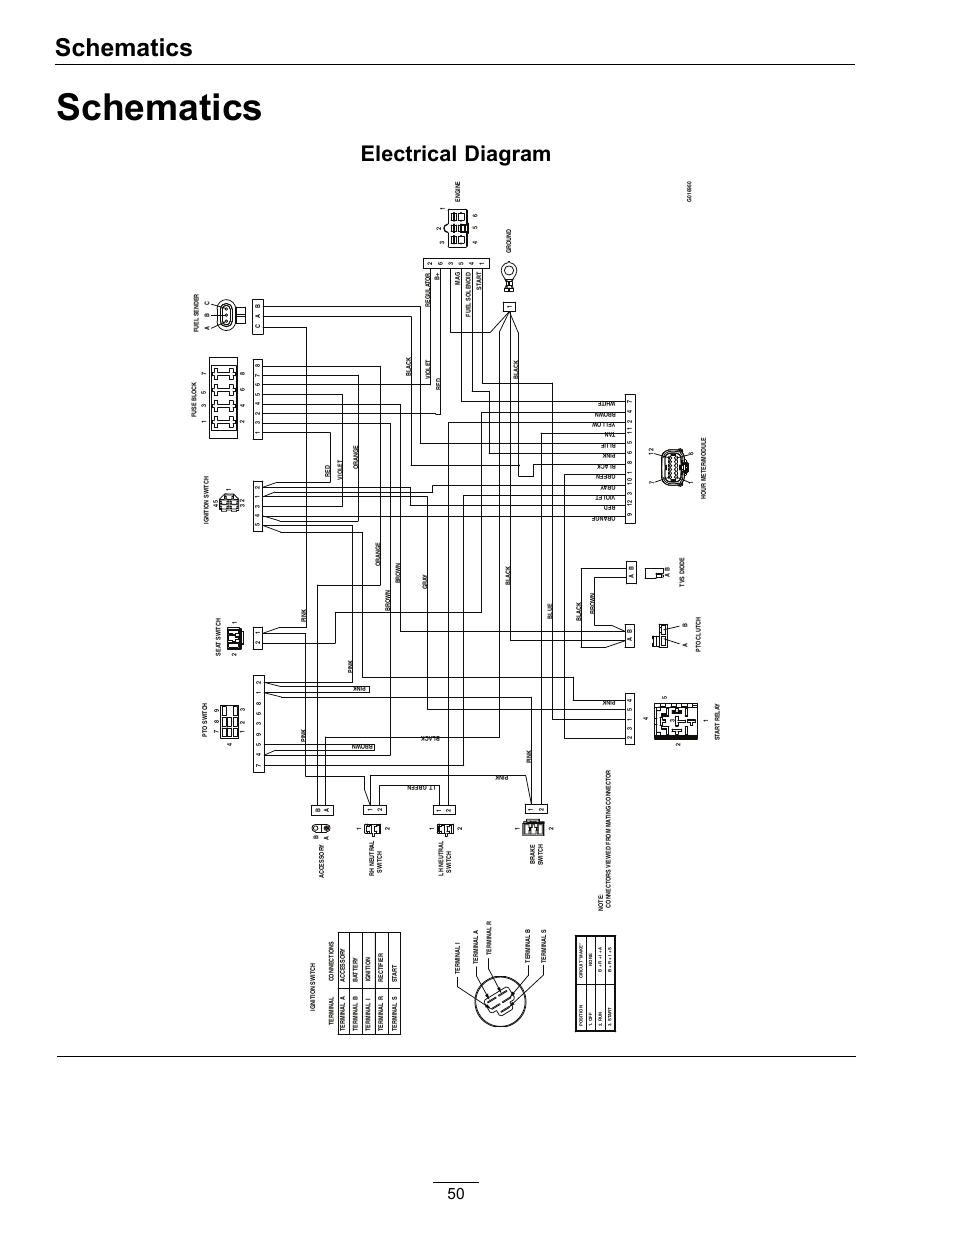 eh taillight wiring diagram